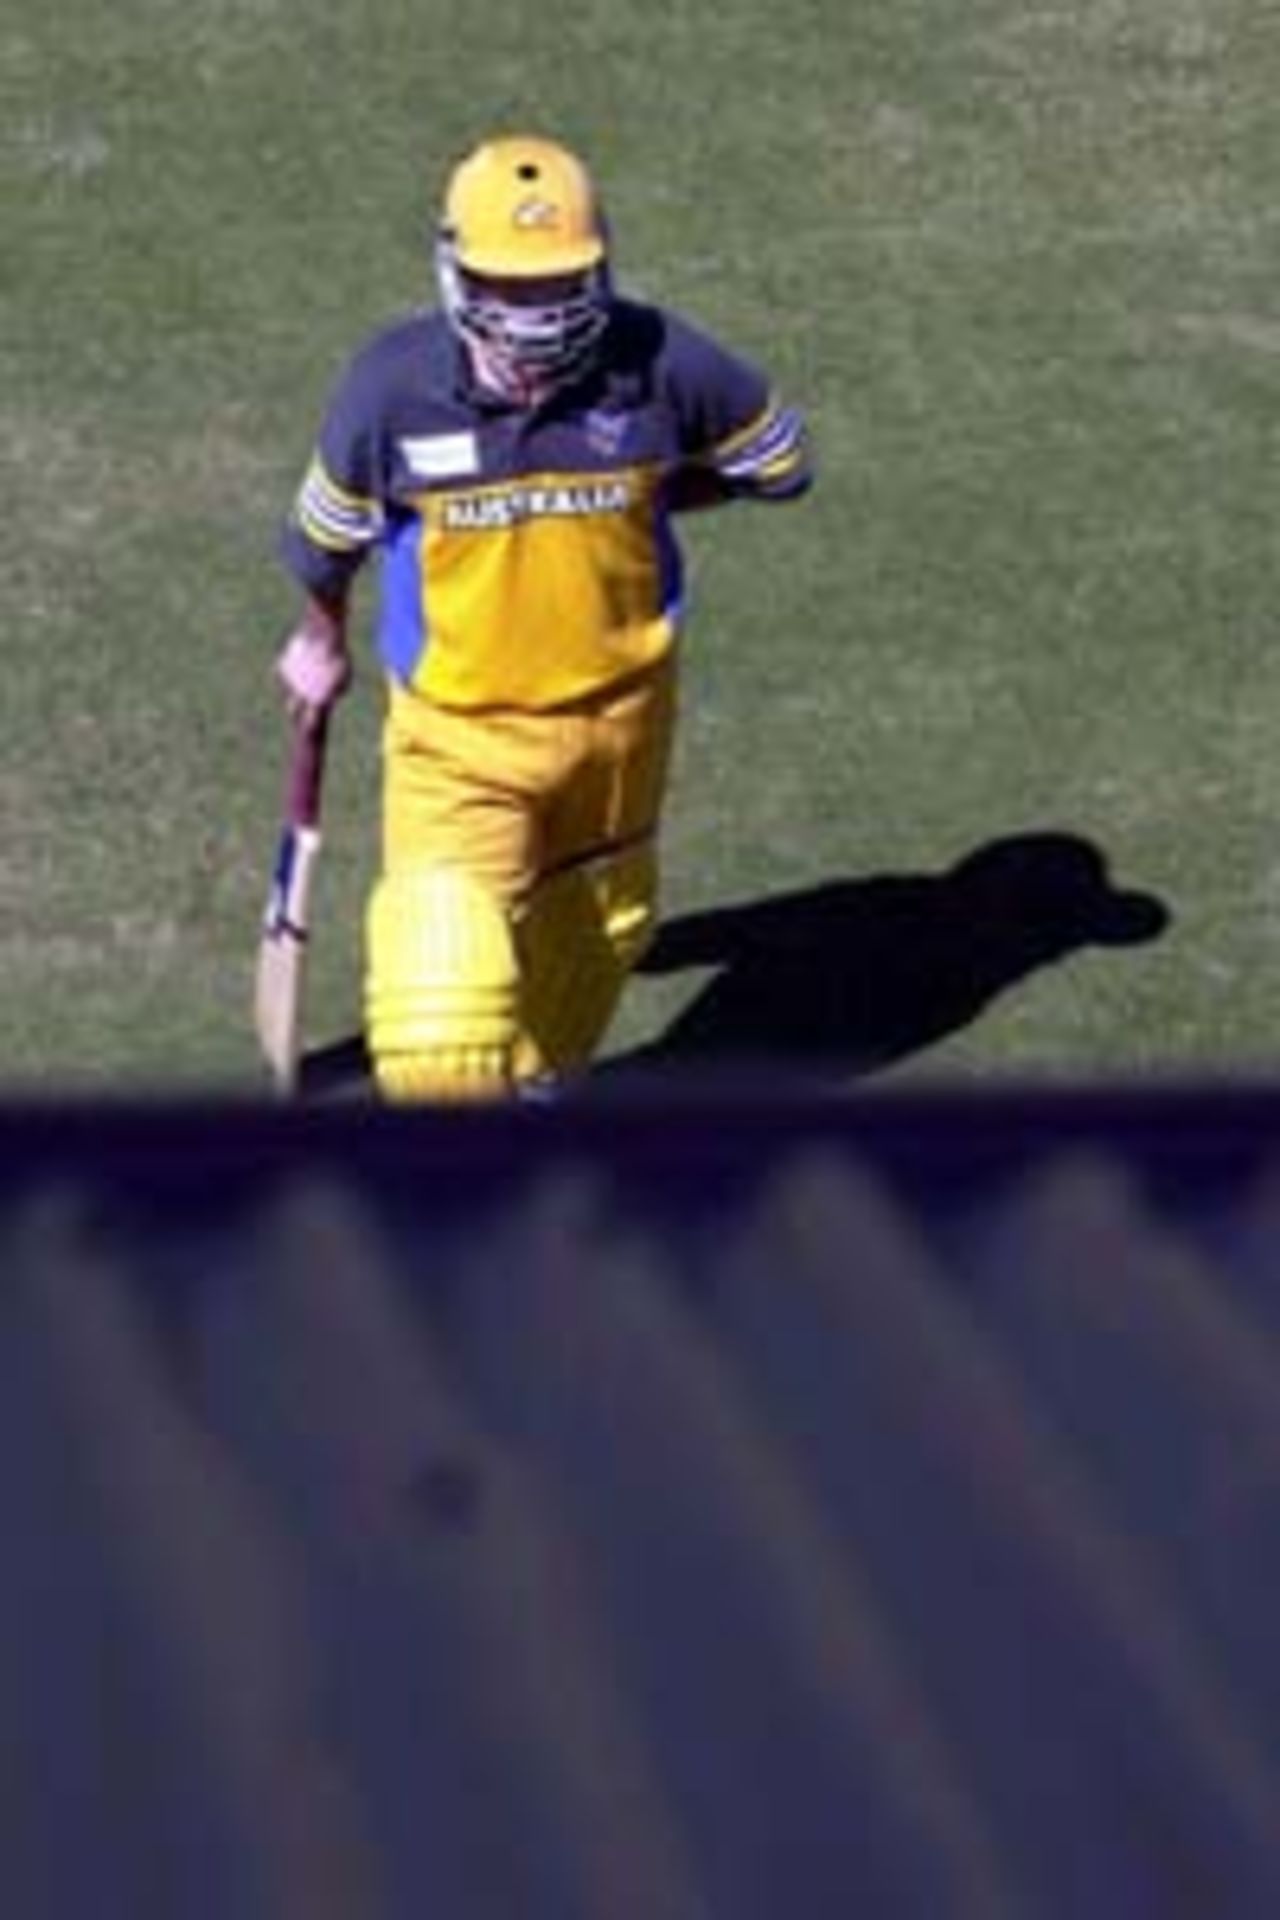 11 Aug 2000: Steve Waugh of Australia comes off the field after losing his wicket to Scott Prestwidge of Queensland during the Australia versus Queensland practice match played at Allan Border Field in Brisbane, Australia. The Australian team are playing the practice match to prepare for the Super Challenge 2000 against South Africa.